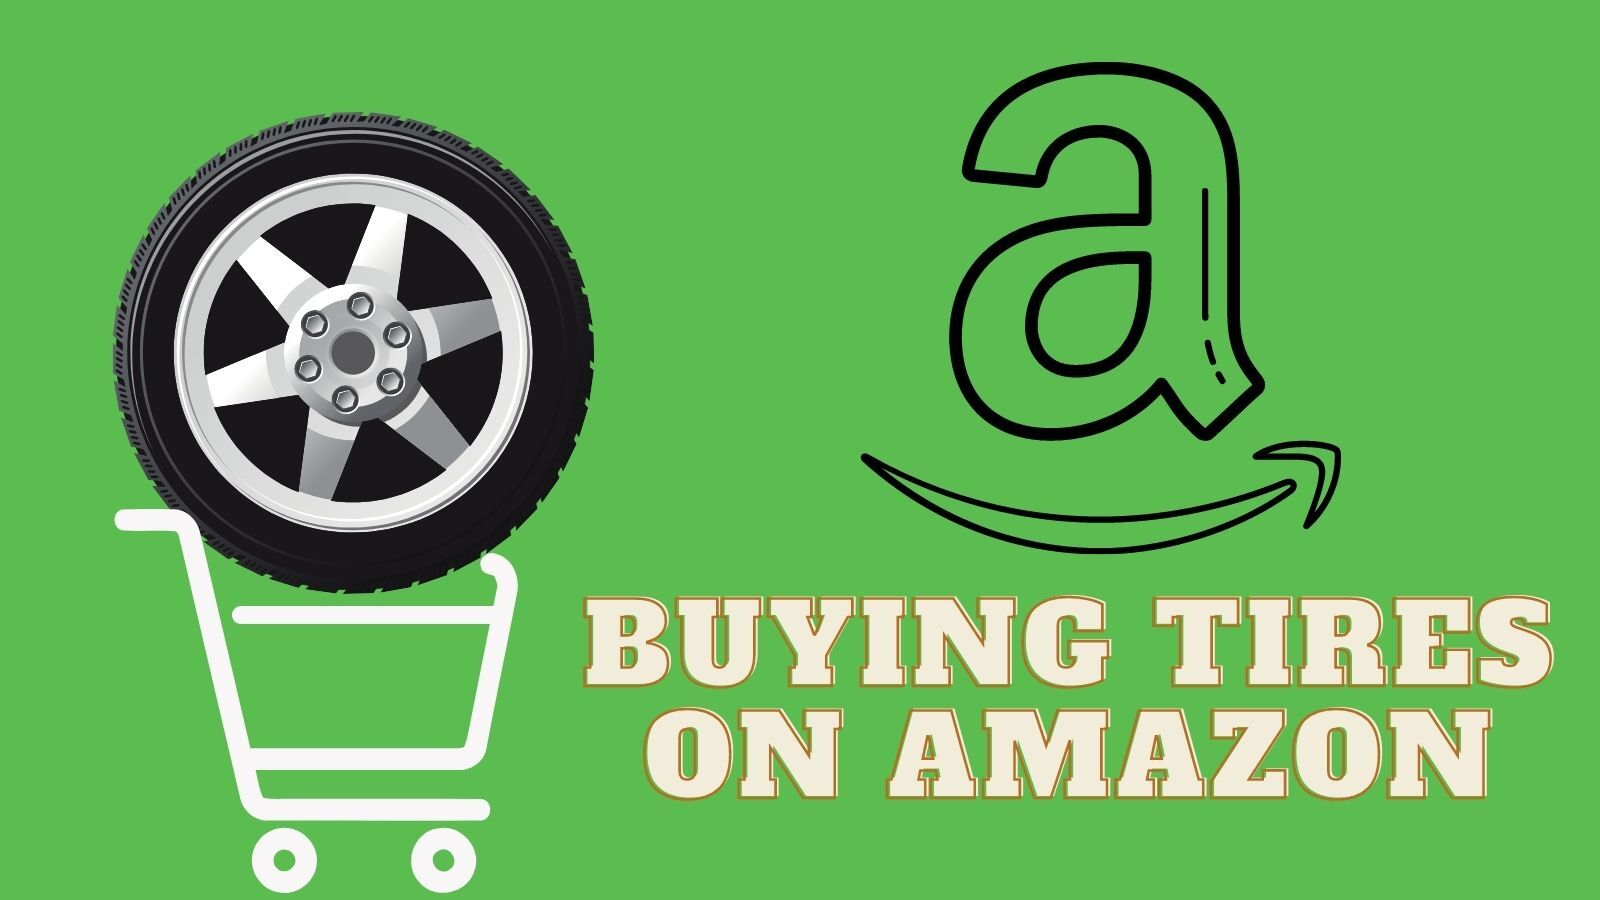 Buying Tires on Amazon: Is It a Good Place to Buy From?